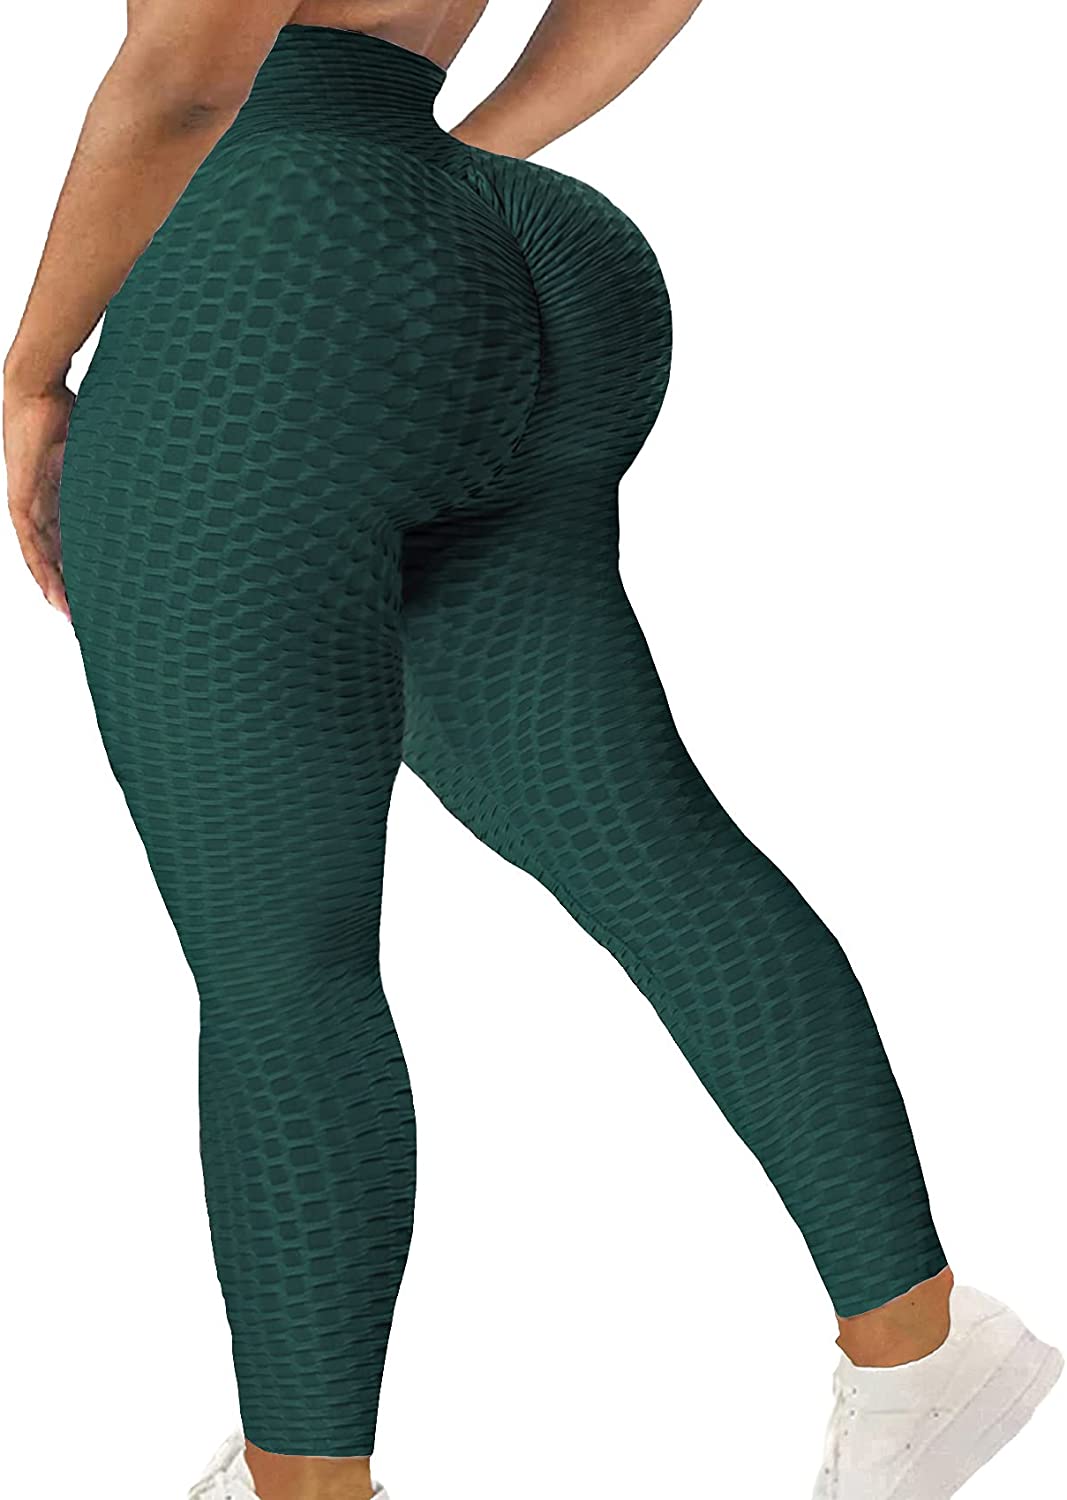 Seasum Butt-Lifting Leggings Are on Sale For Up to 47% Off